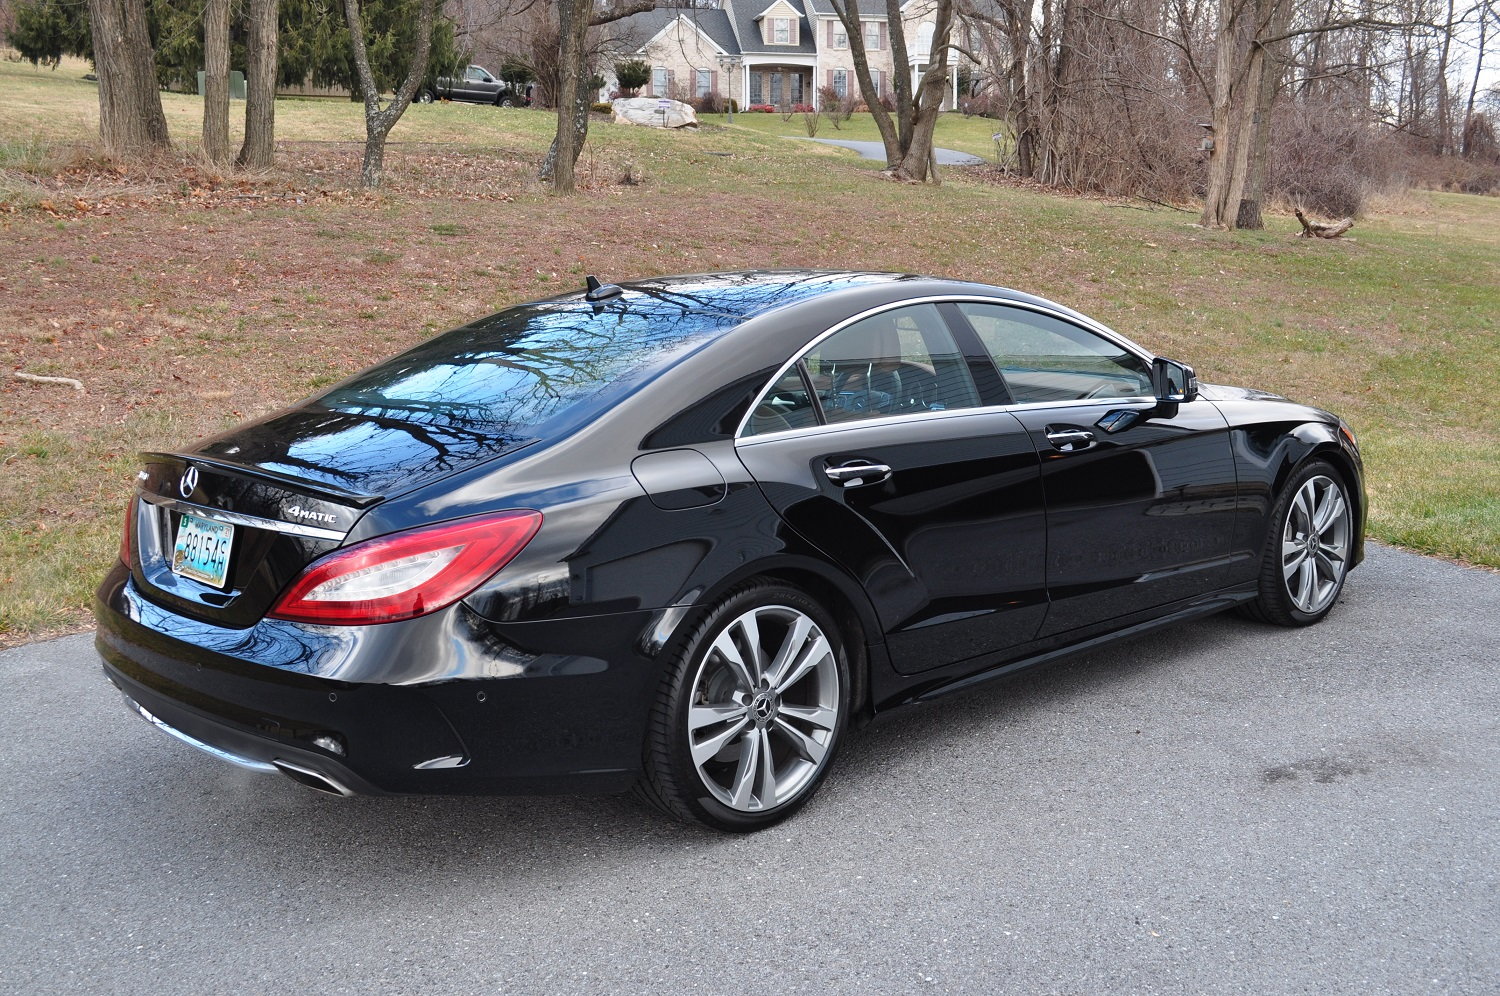 2017 Mercedes-Benz CLS550 - CPO'd 2017 CLS 550 4Matic - Used - VIN WDDLJ9BB6HA198429 - 31,625 Miles - 8 cyl - AWD - Automatic - Black - Frederick, MD 21703, United States